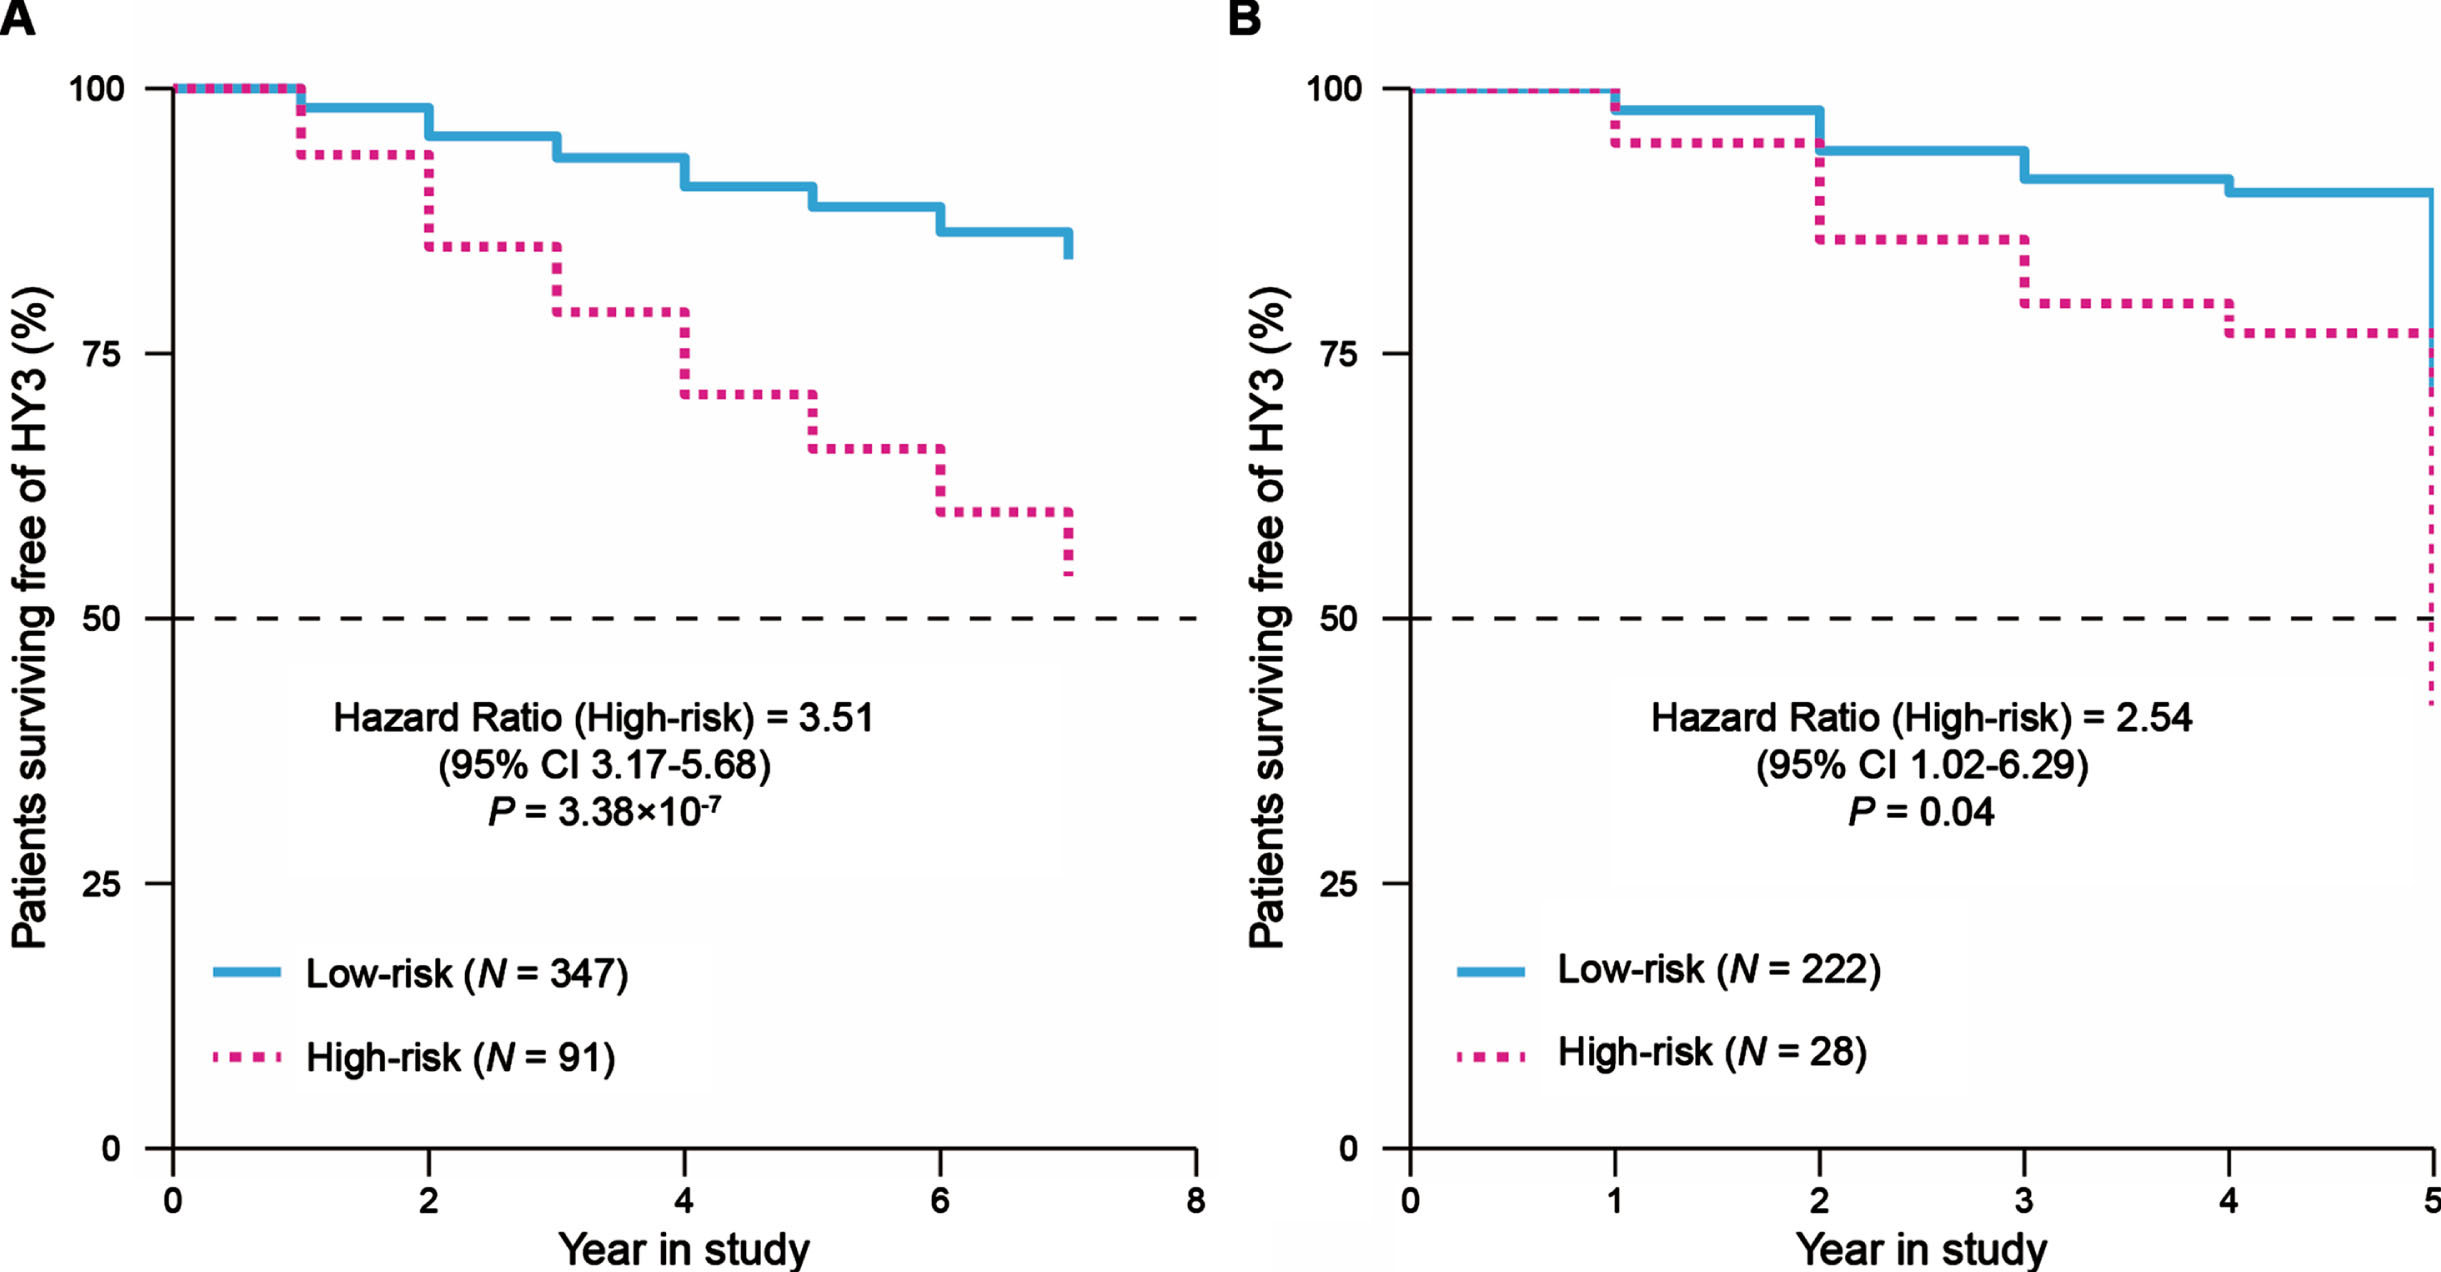 Survival analysis to evaluate the predictive ability of the two-gene signature for the motor progression in PD. Cox-adjusted survival curves for patients in the high- and low-risk score groups from the PPMI cohort (A) and PDBP cohort (B) with a cutoff risk score of 1.46. HY3, Hoehn and Yahr stage 3.